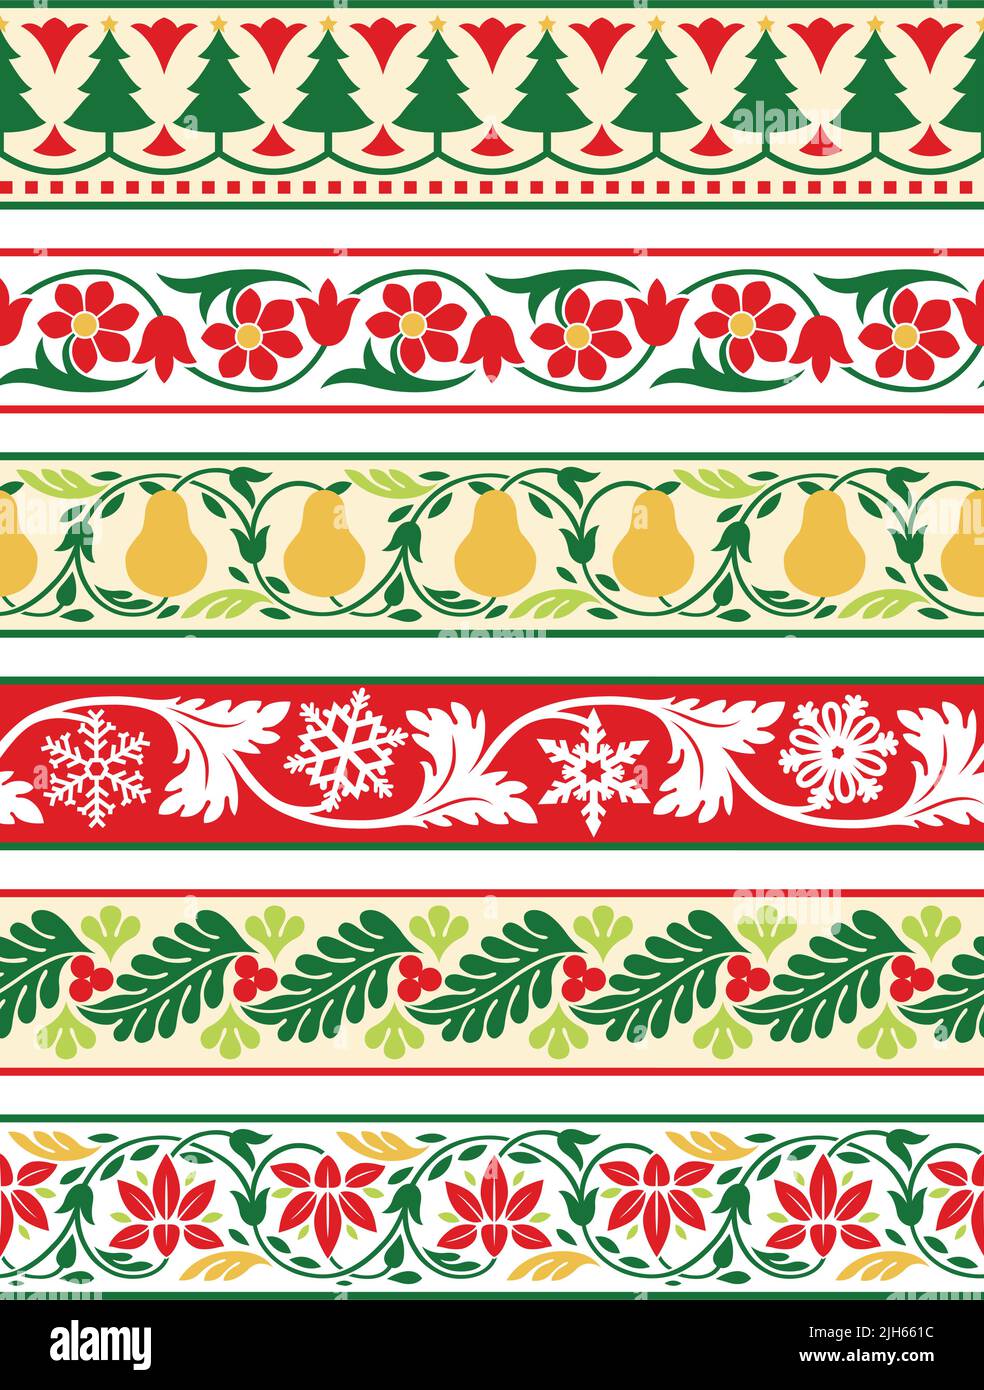 A set of vector decorative Christmas floral borders and patterns. Stock Vector